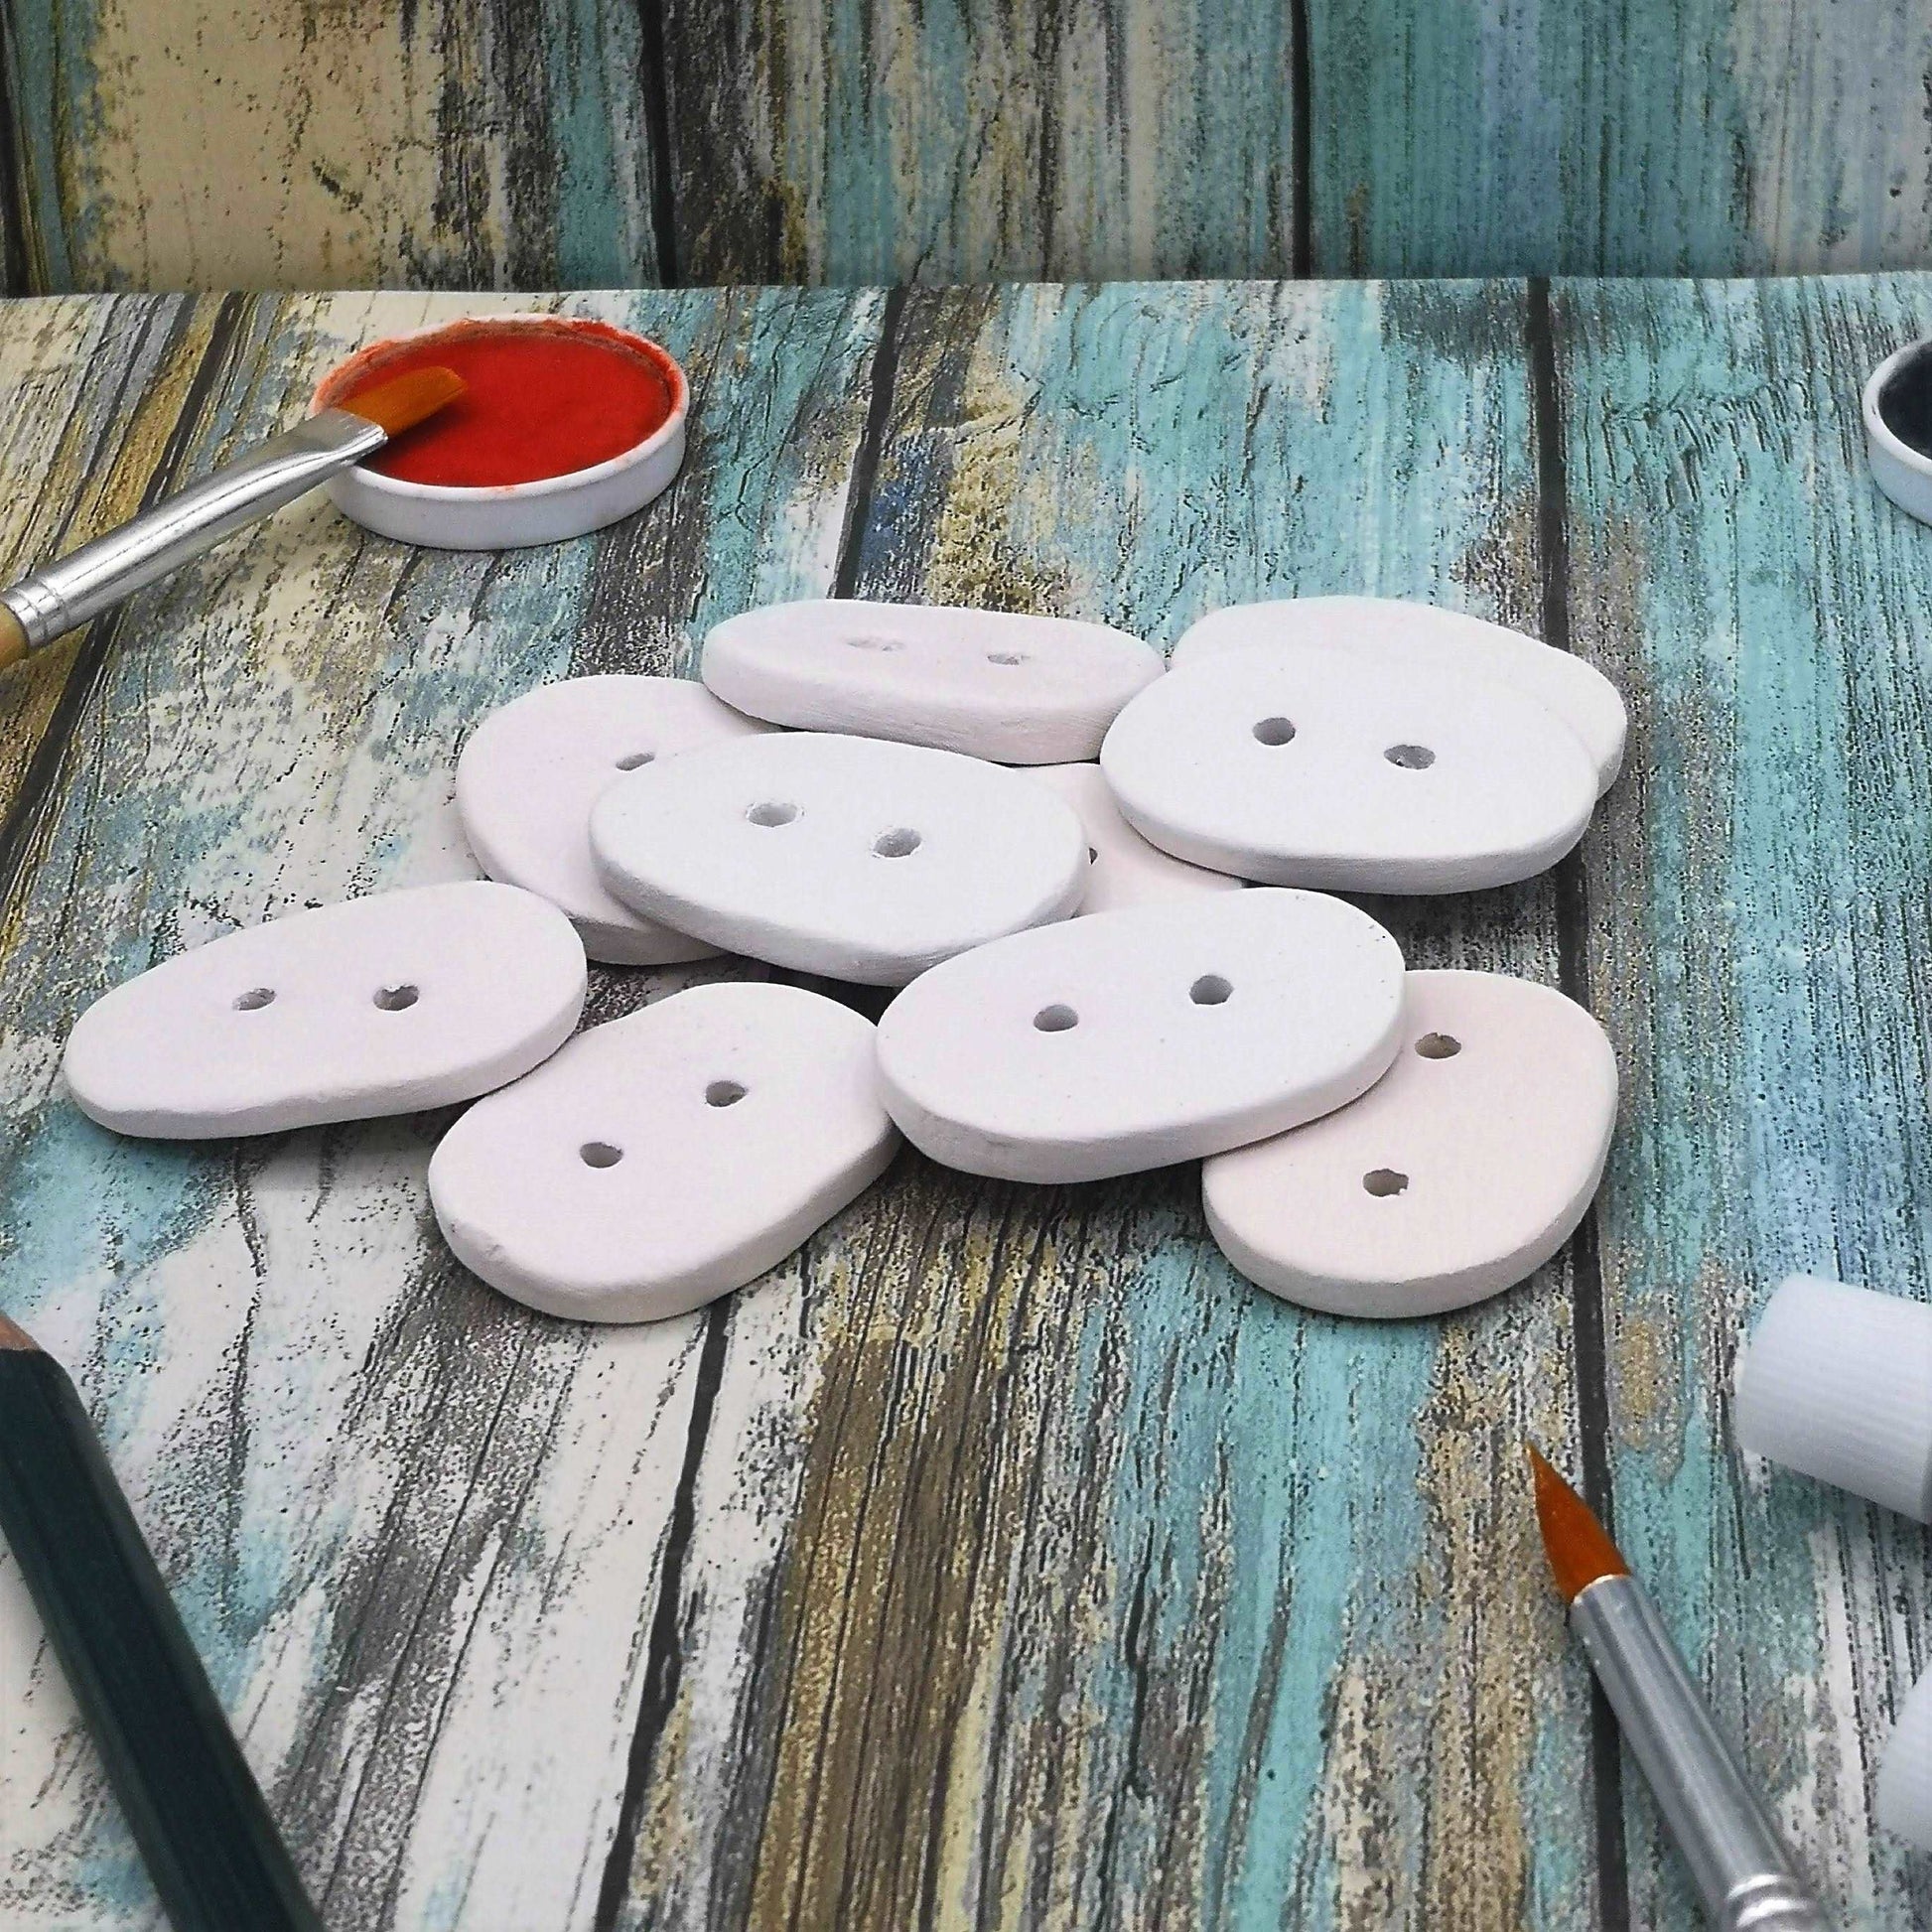 10Pc Large Oval Sewing Buttons, Custom Buttons Diy Craft Kit, Best Sellers, Handmade Ceramic Bisque Ready To Paint Sewing Notions